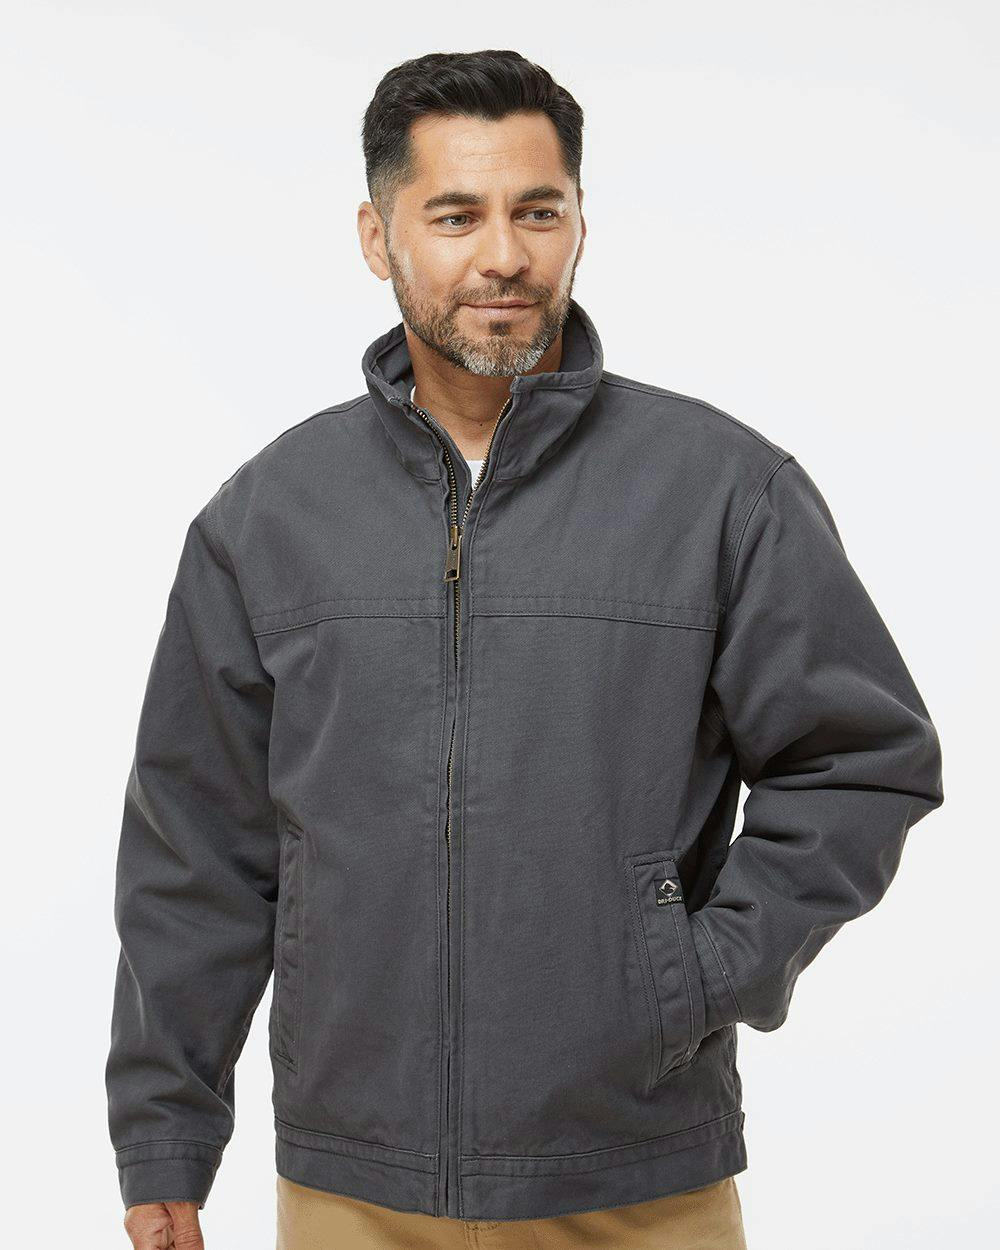 Image for Maverick Boulder Cloth™ Jacket with Blanket Lining Tall Sizes - 5028T